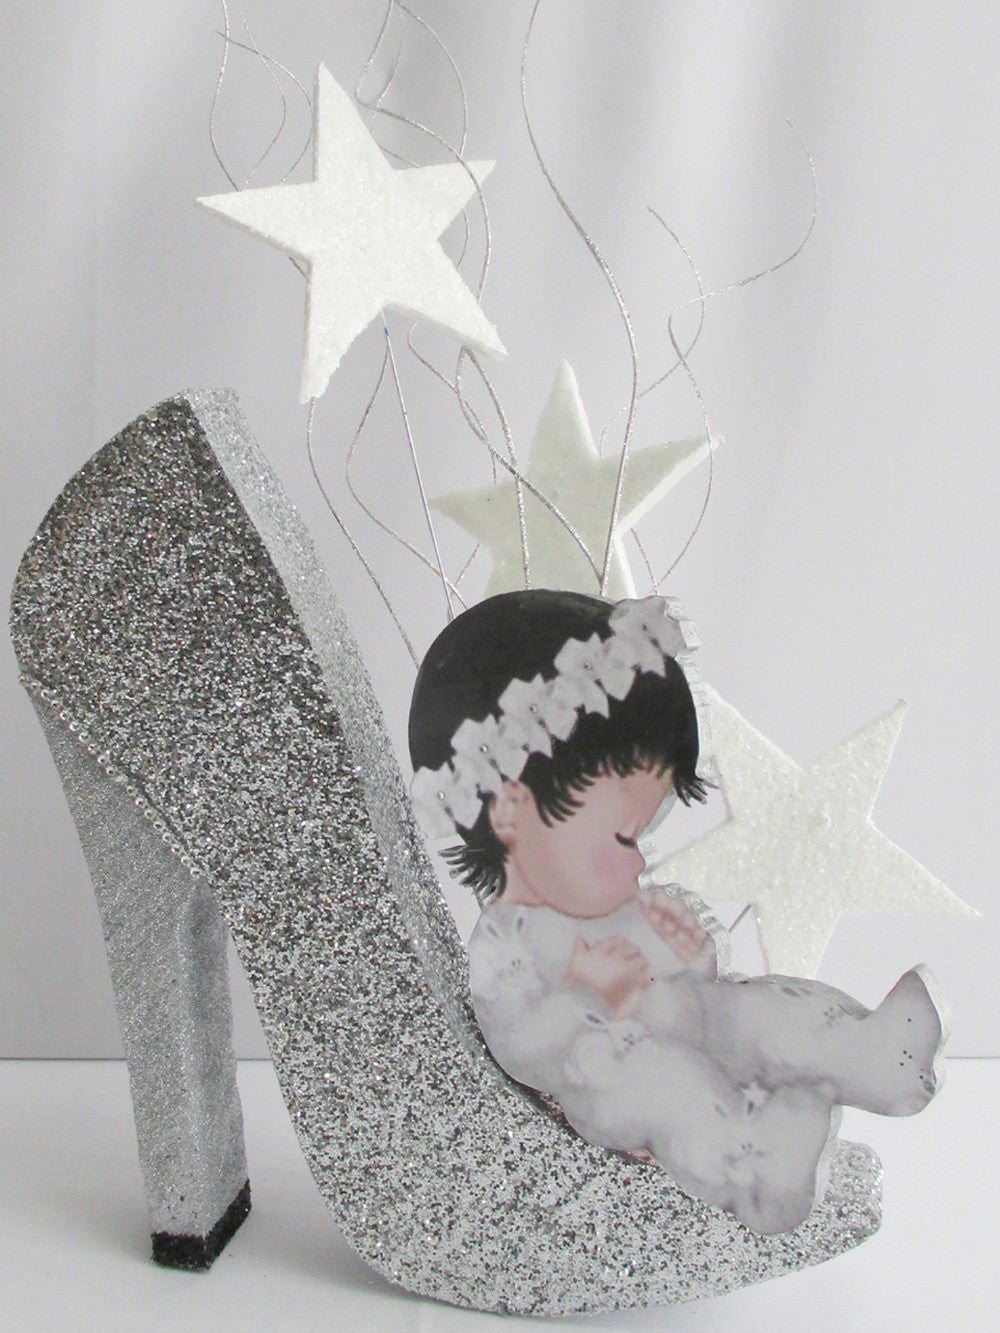 Baby on high heel shoe centerpiece - Designs by Ginny